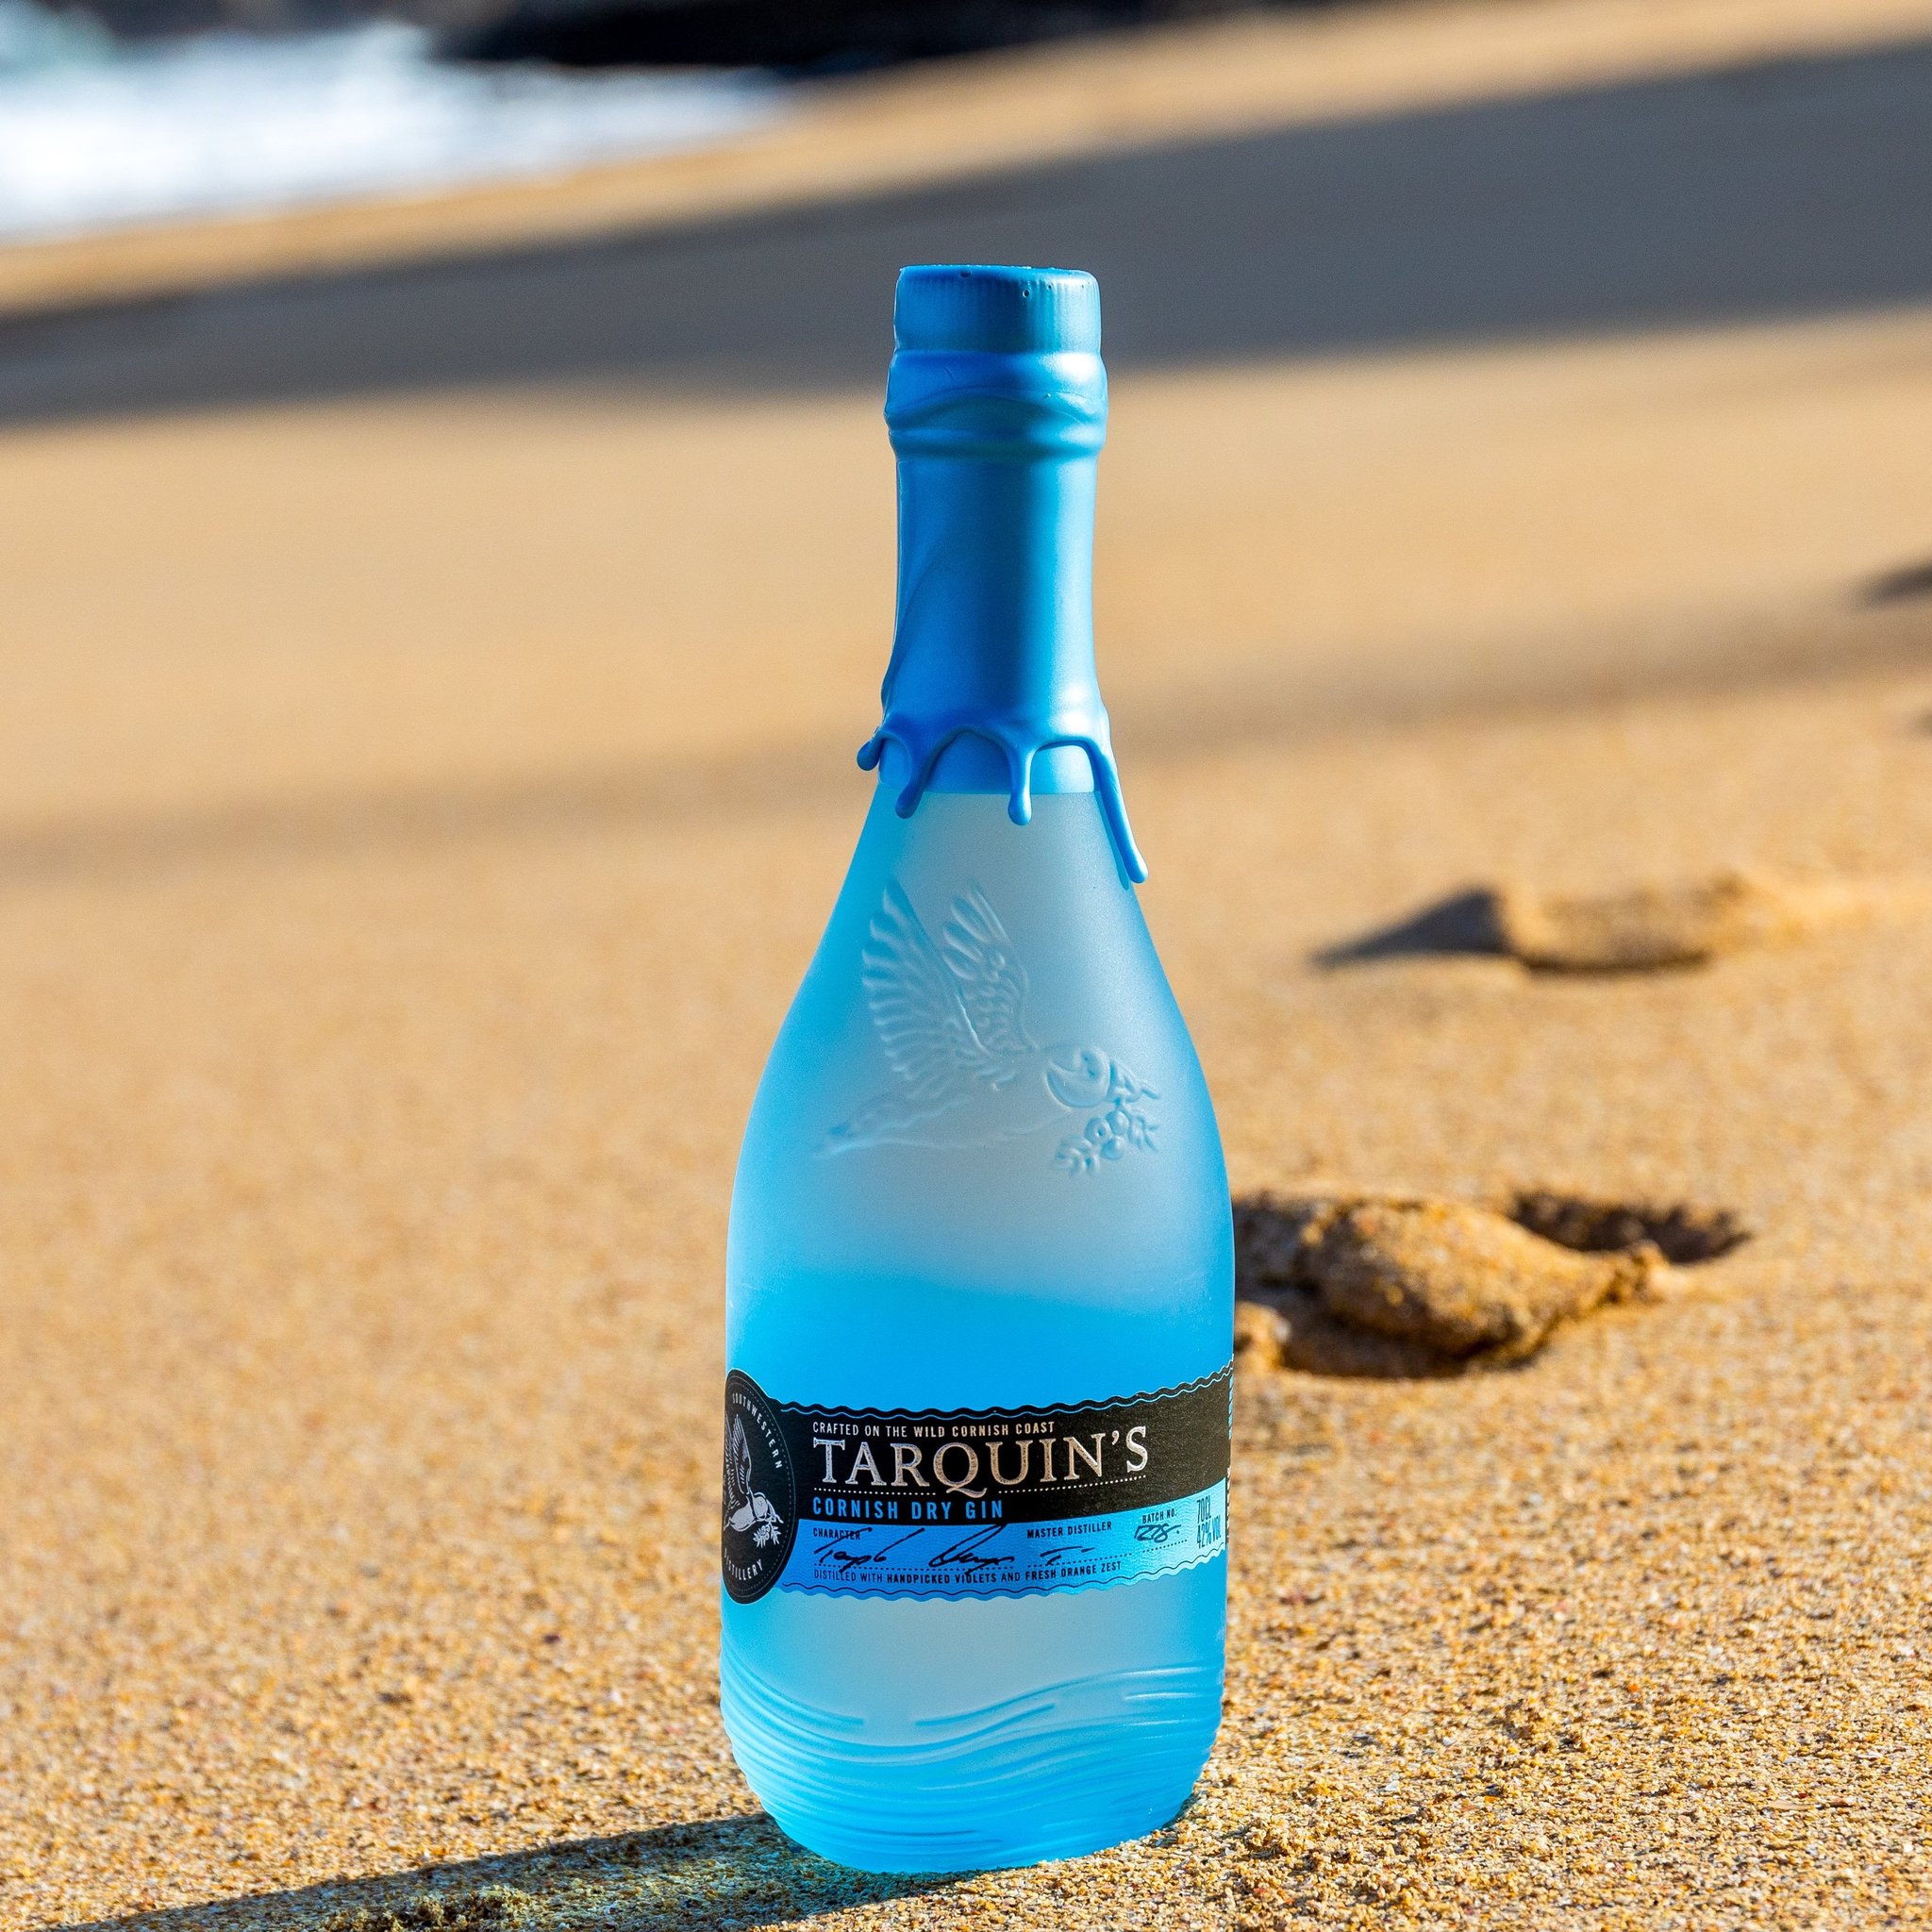 Image of Tarquin's Cornish Dry Gin by Southwestern Distillery, designed, produced or made in the UK. Buying this product supports a UK business, jobs and the local community.